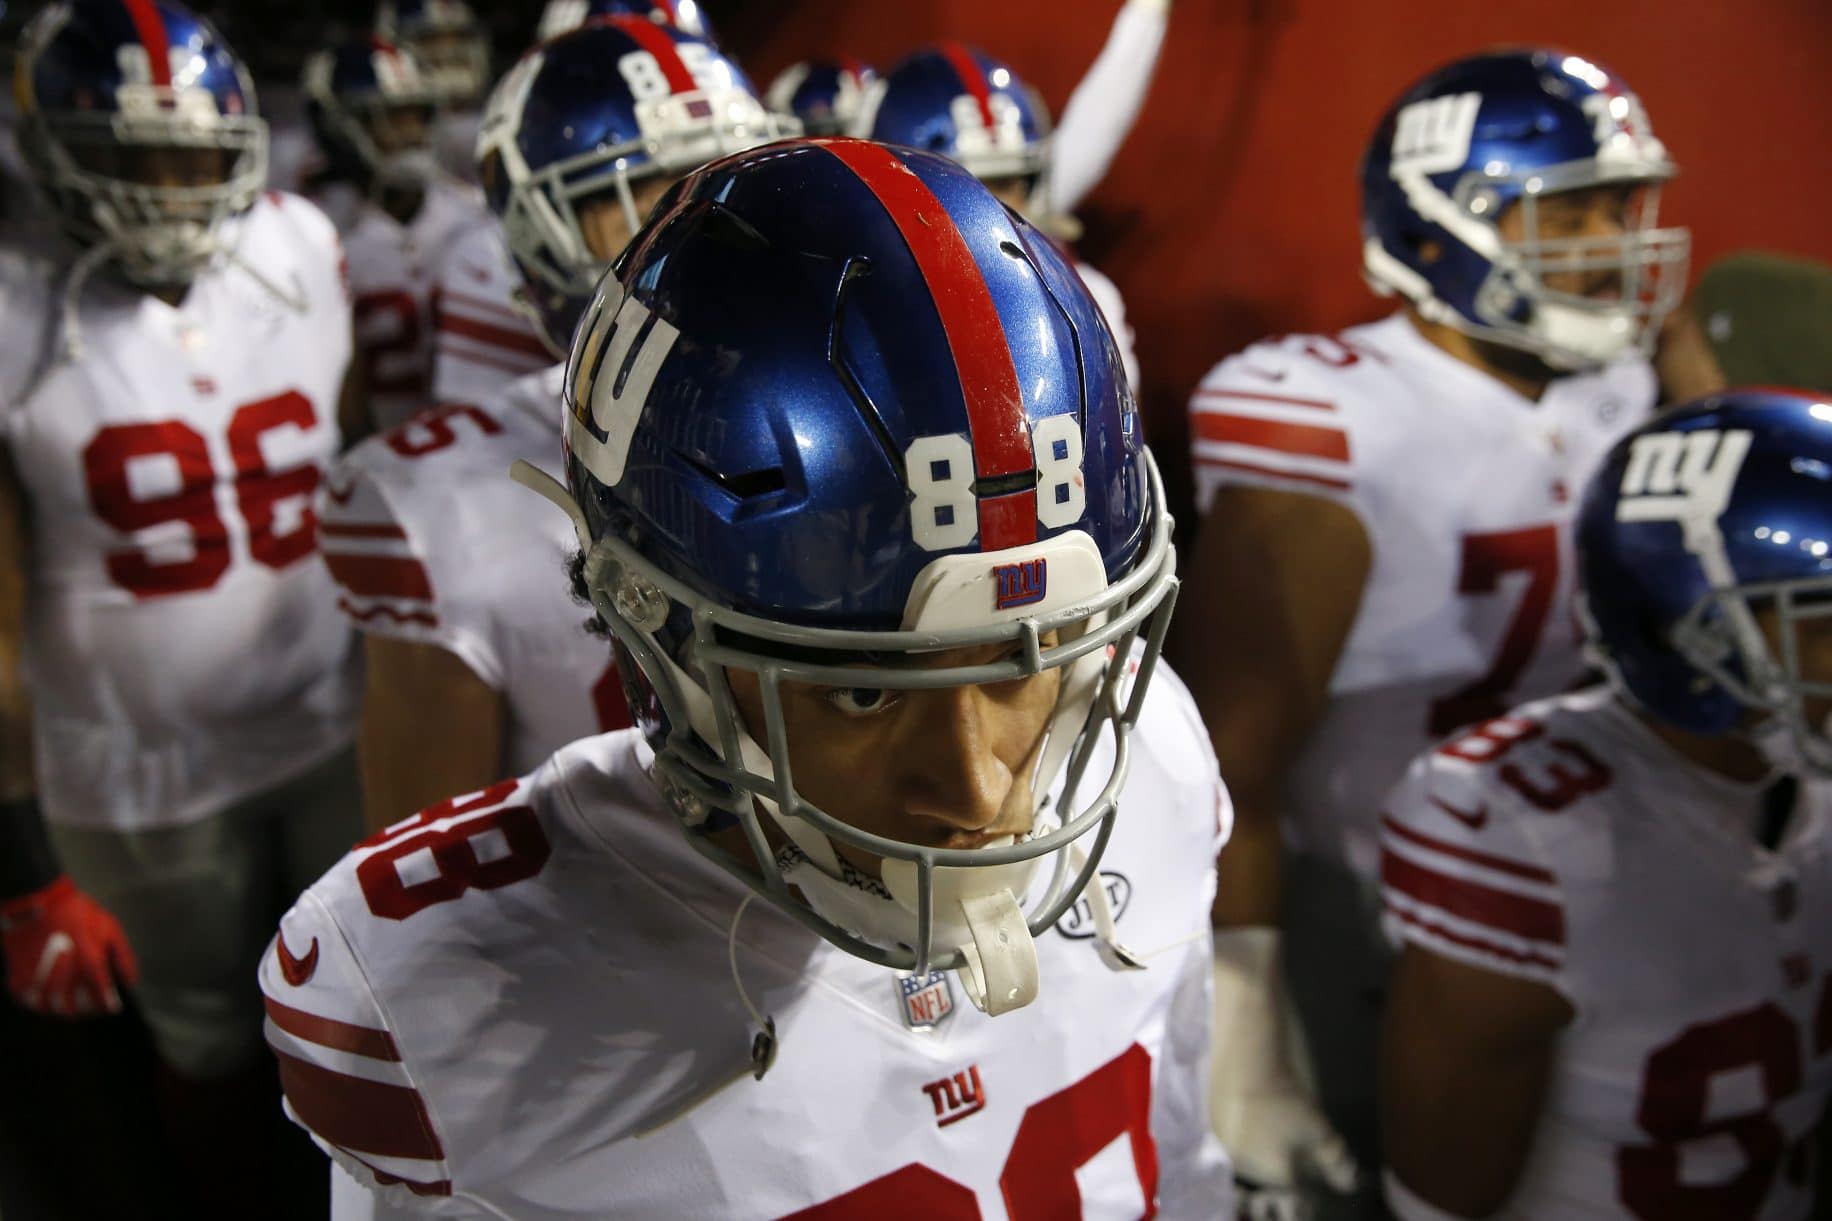 New York Giants need to get Evan Engram back in the mix vs. Oakland